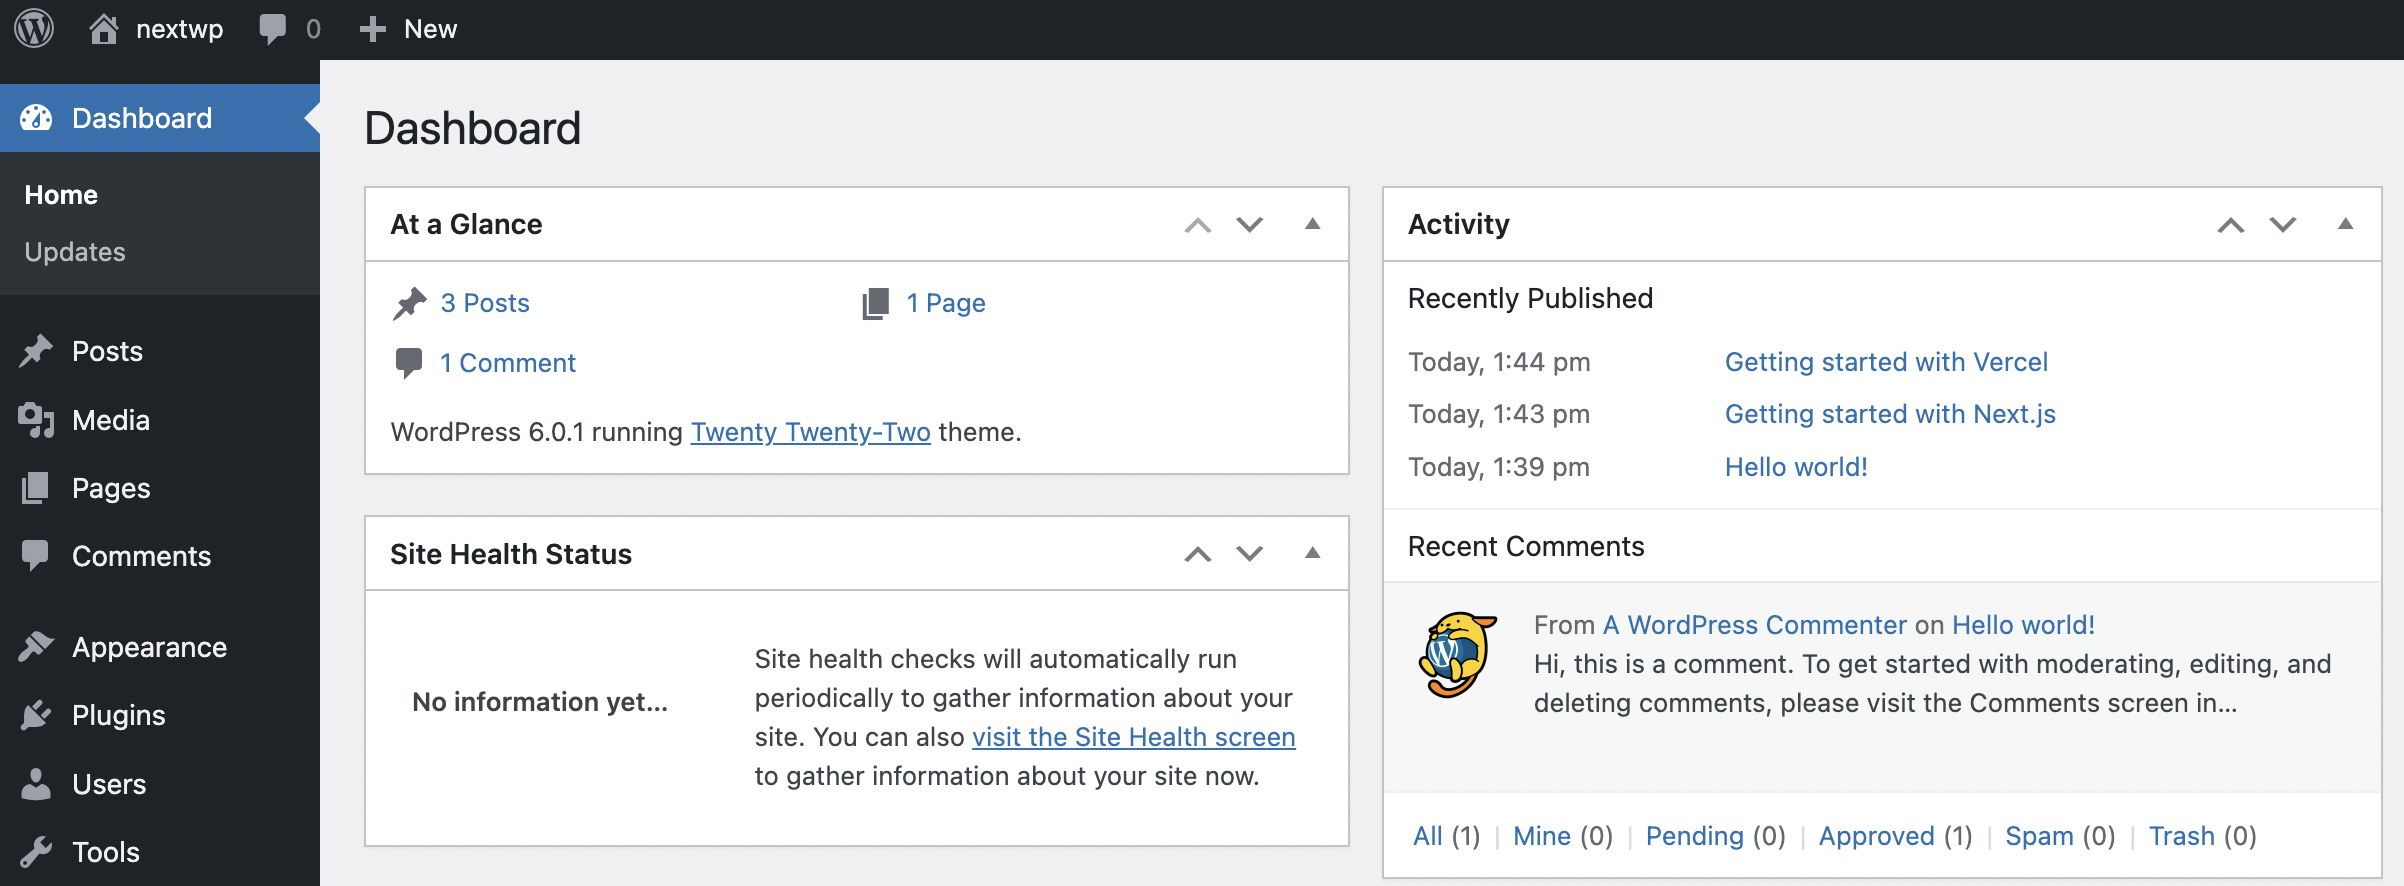 An overview of your WordPress dashboard.